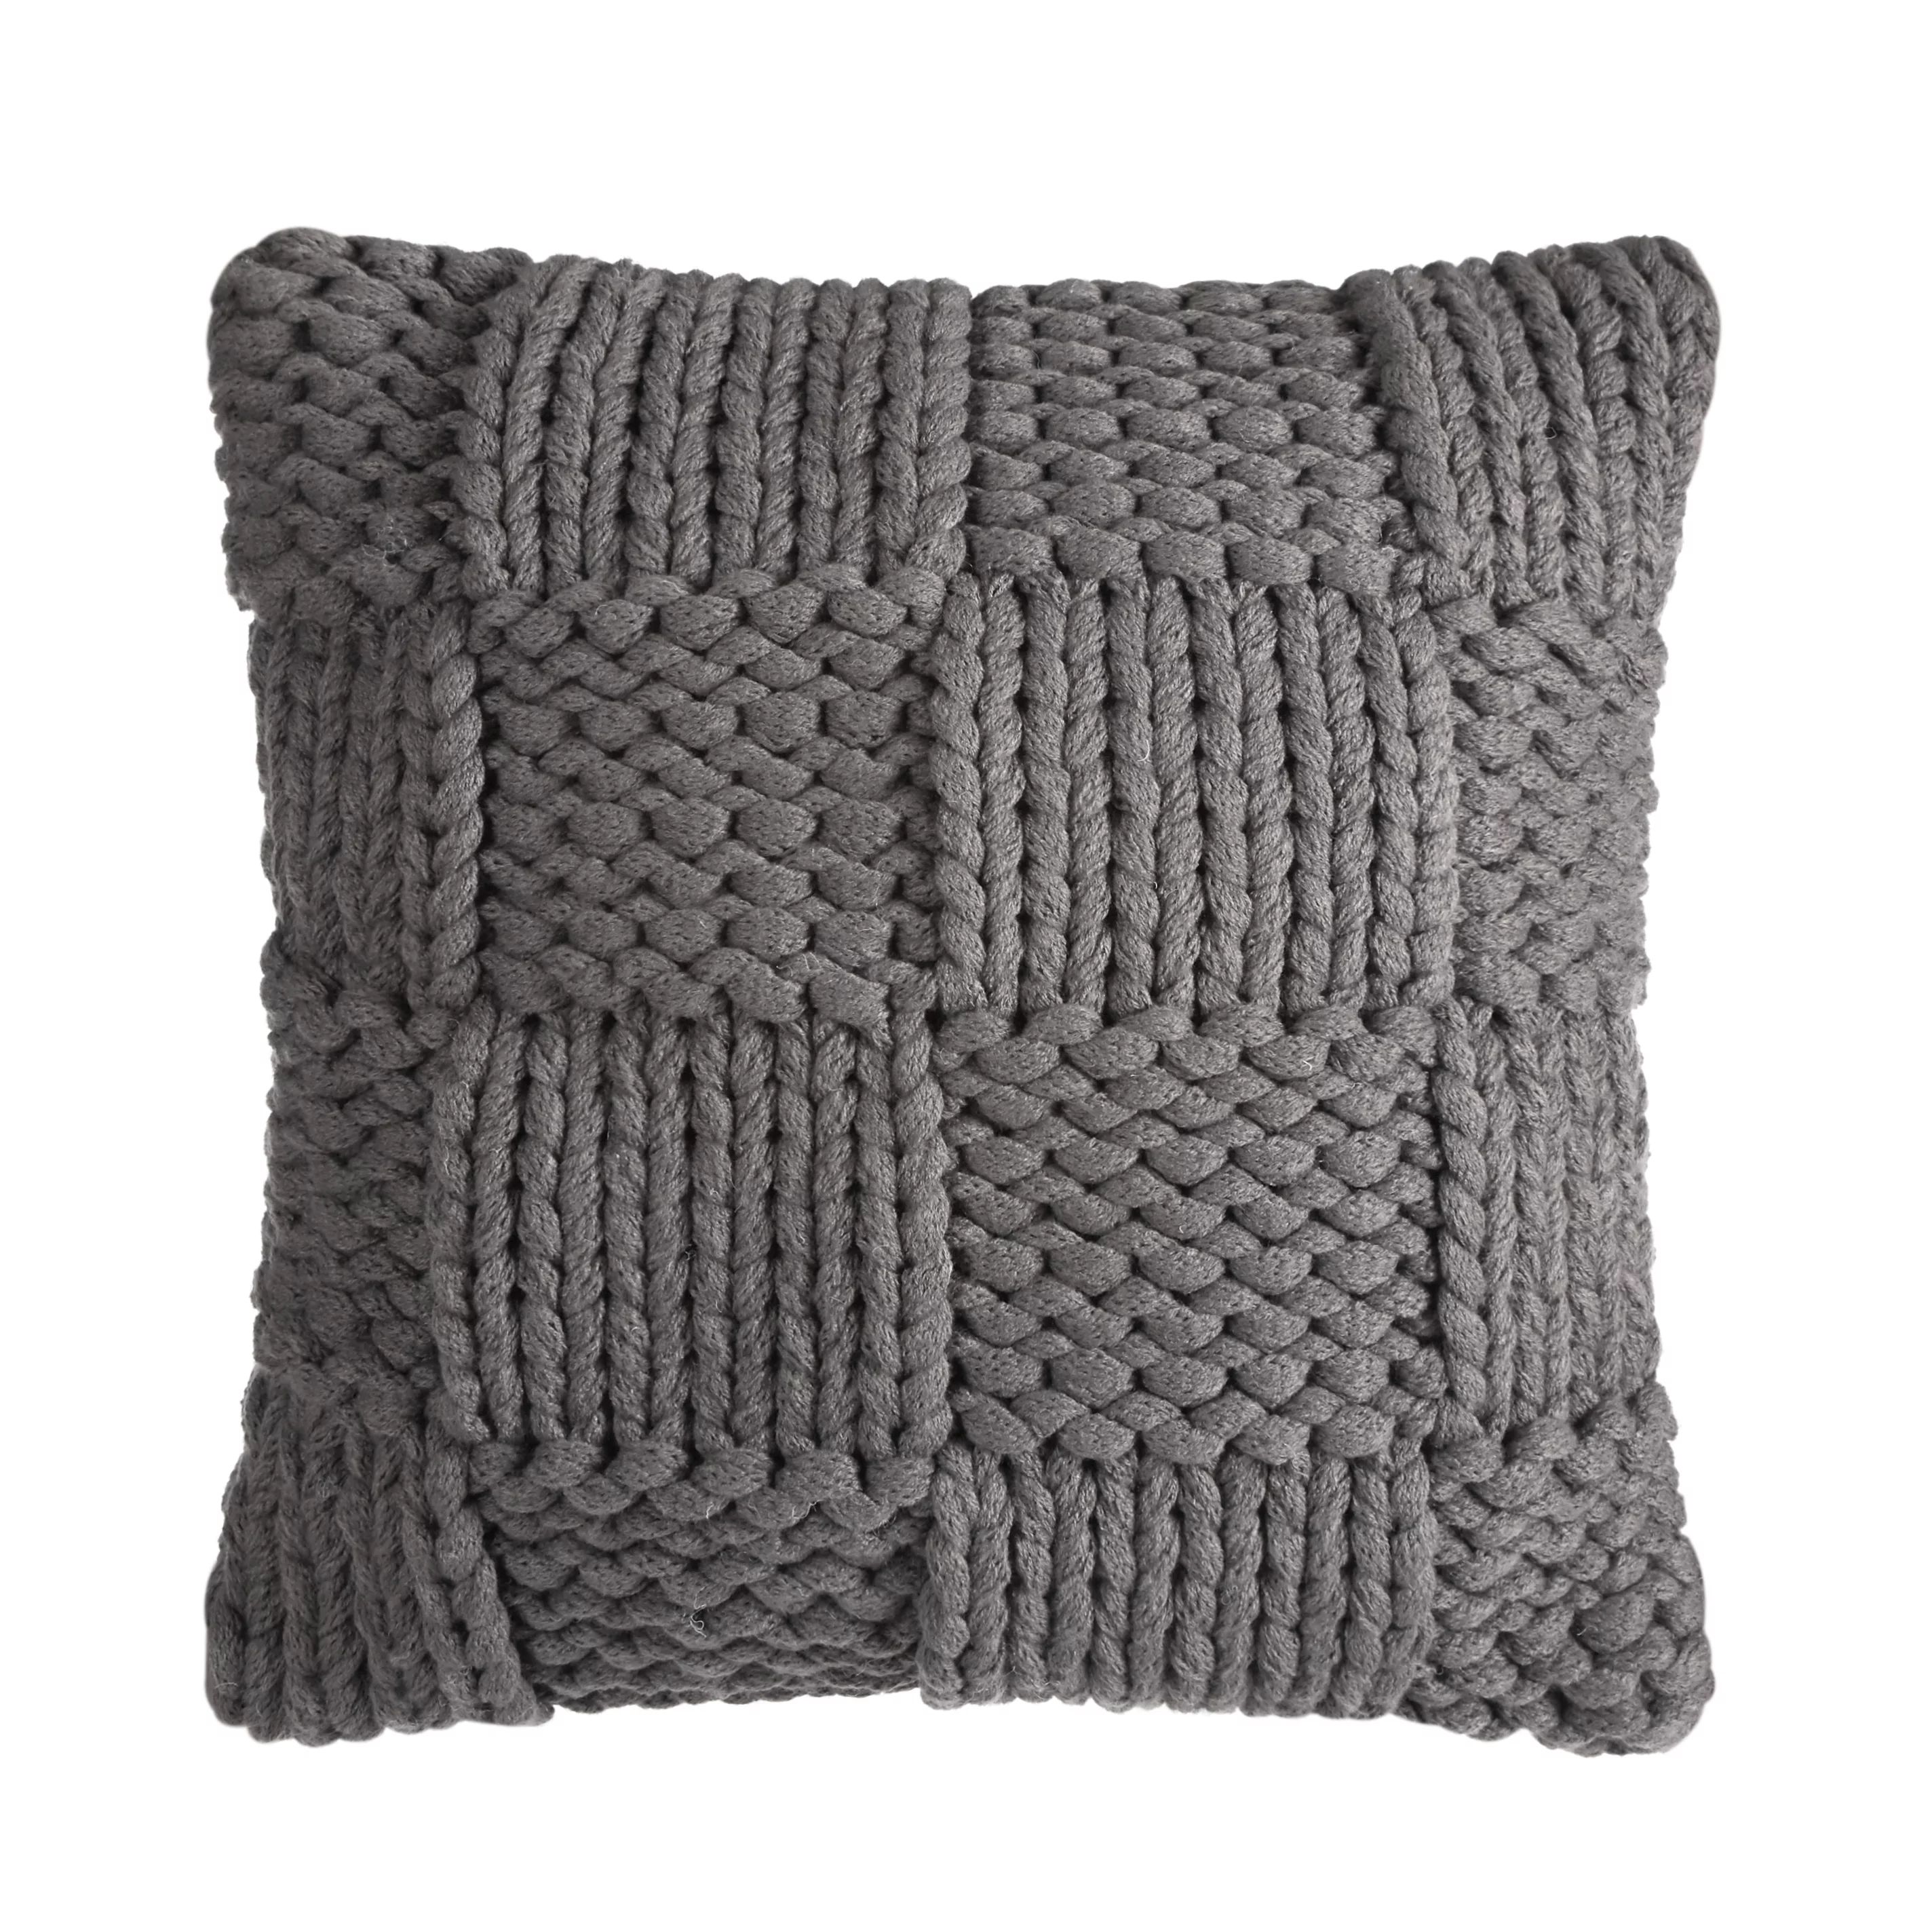 Better Homes & Garden Chunky Sweater Knit Pillow, Gray, 18 in x 18 in, Square, Polyester Fill | Walmart (US)